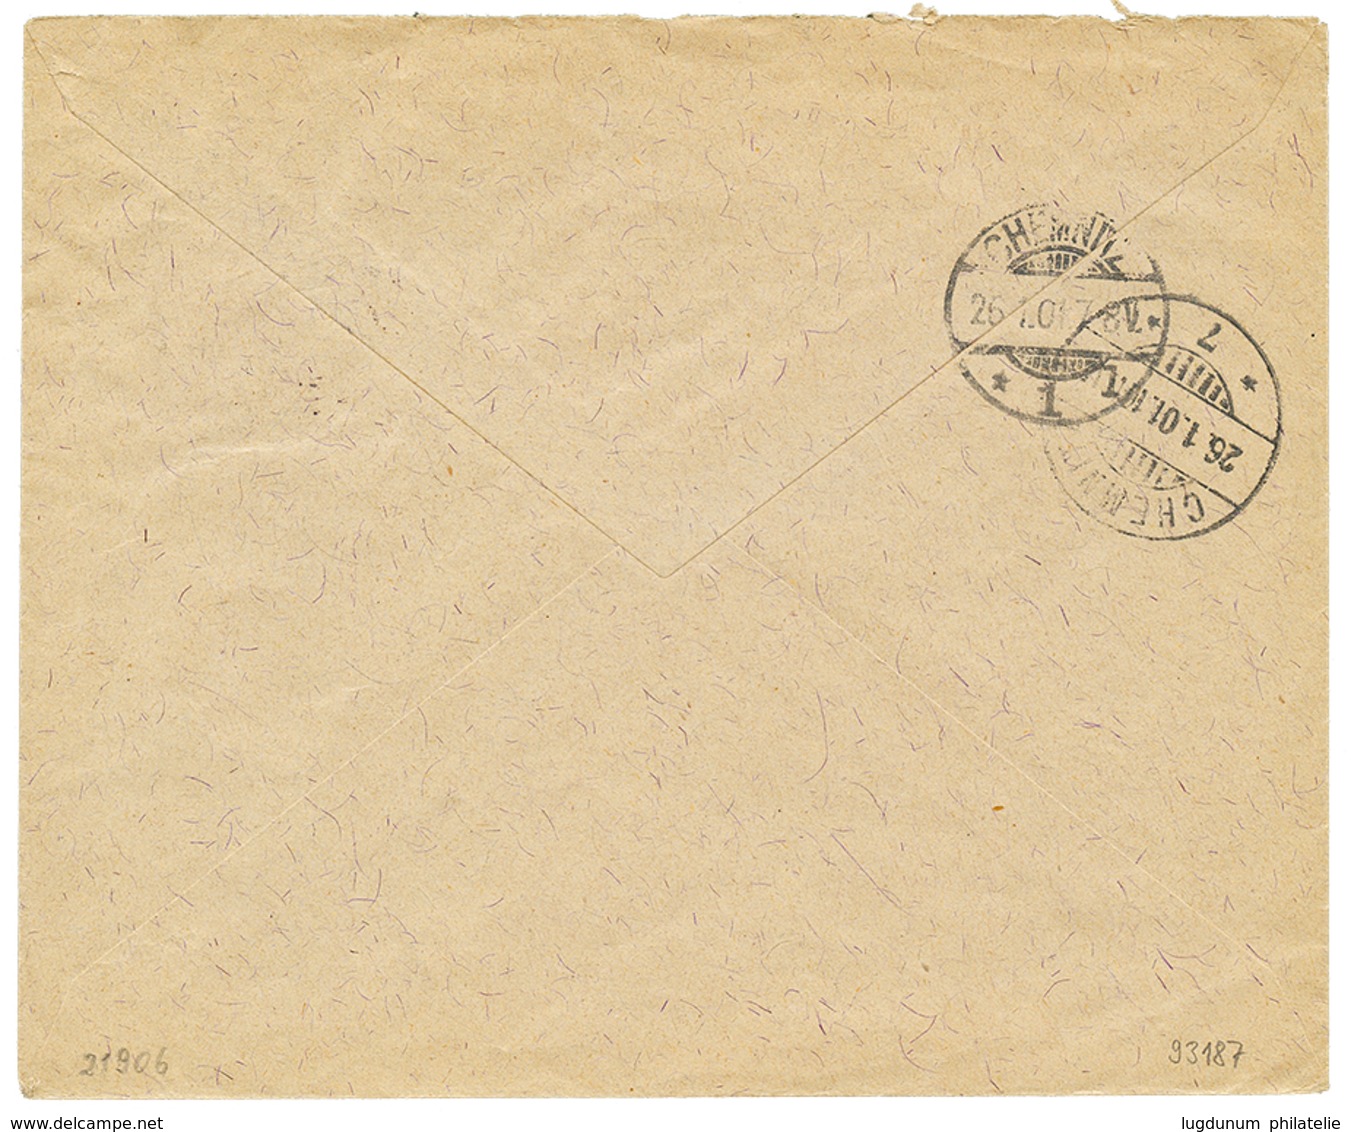 943 1901 1P Canc. I.R SPEDIZIONE CANEA On Commercial Envelope To GERMANY. Superb. - Eastern Austria